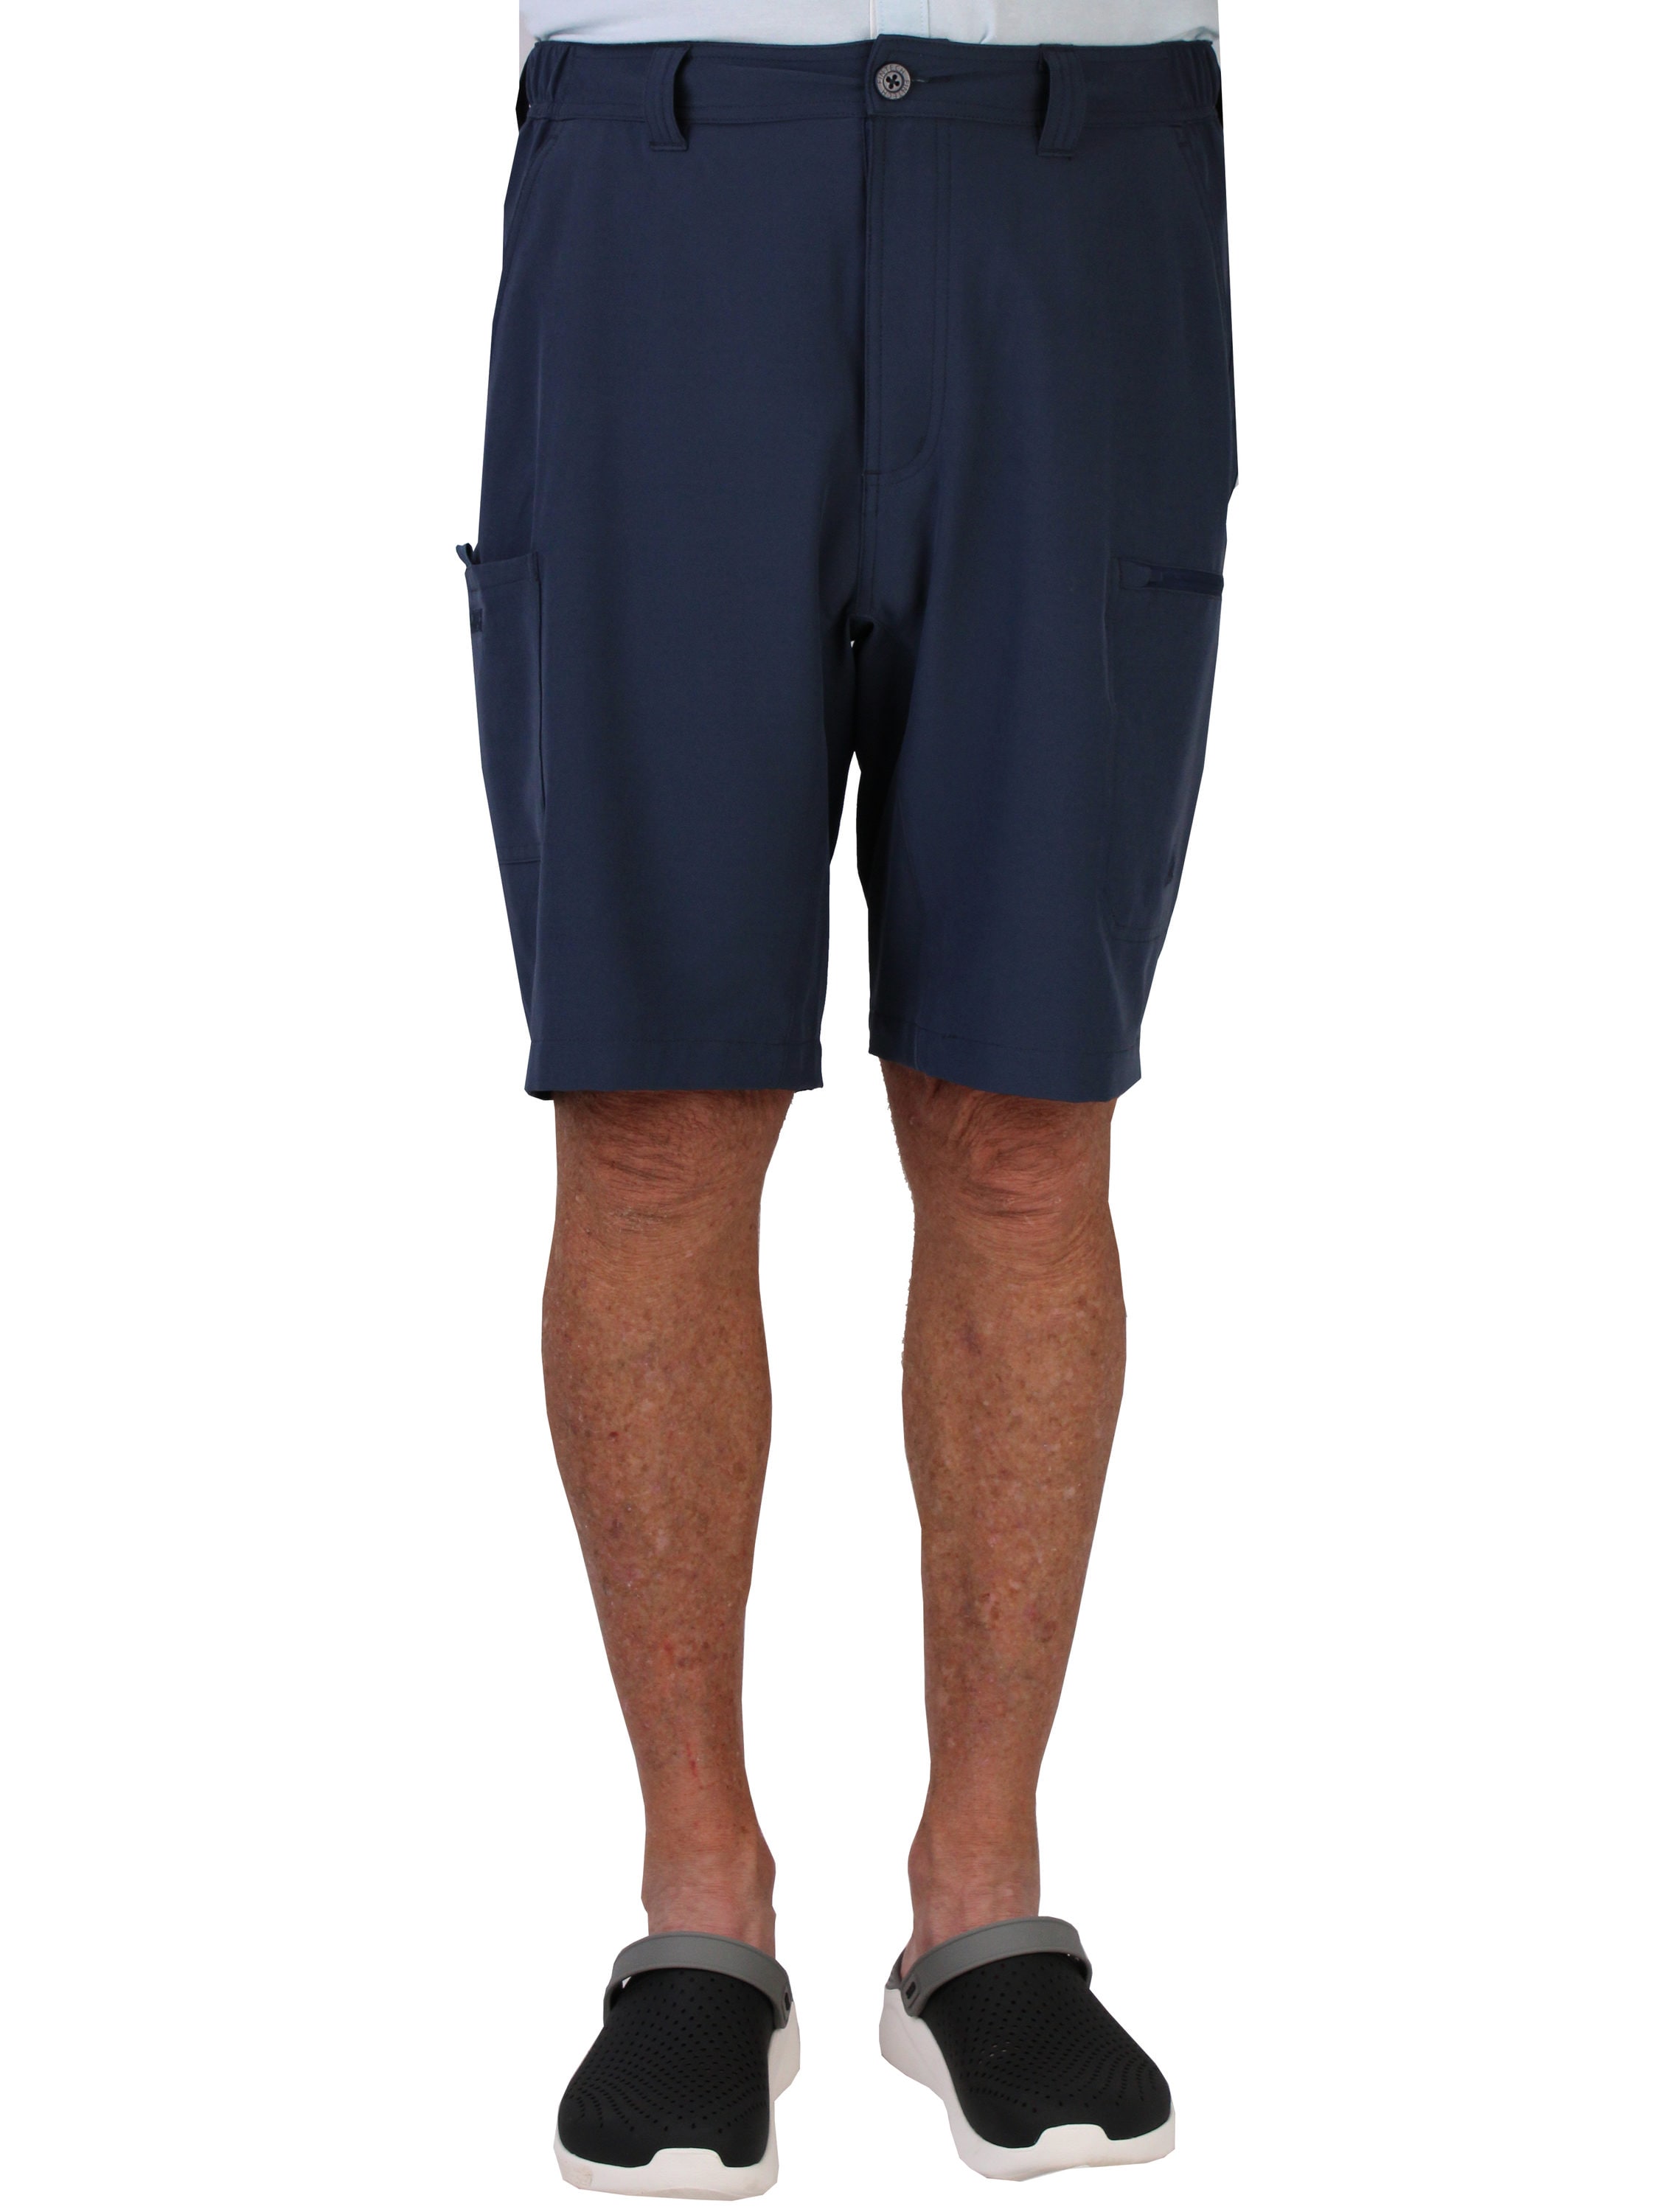 Blue Work Shorts at Lowes.com